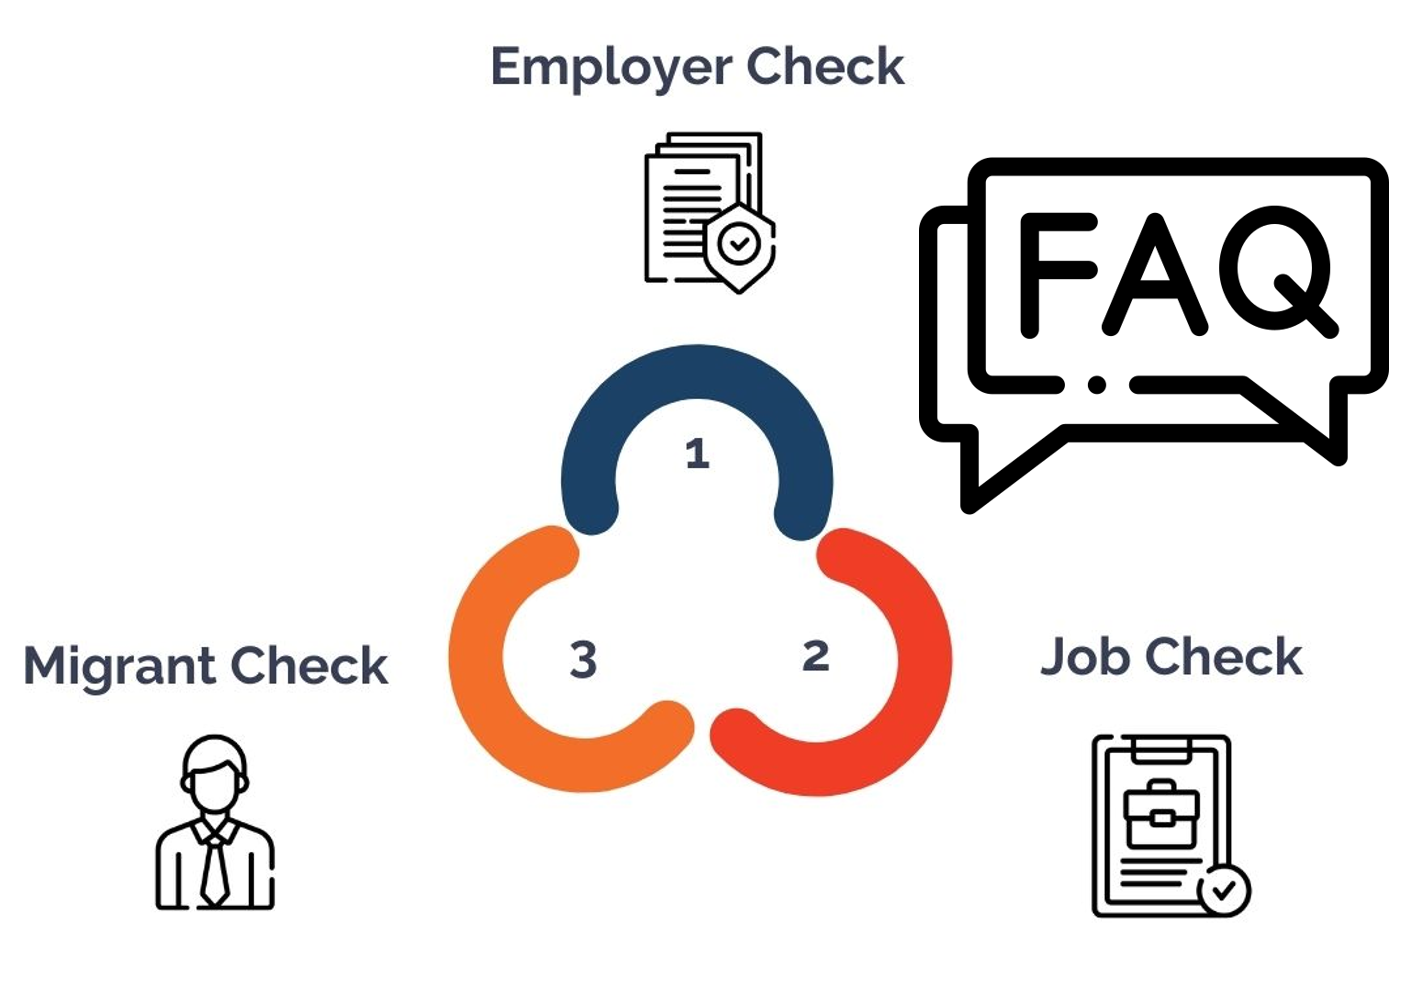 FAQs - Upcoming Employer Accreditation Changes